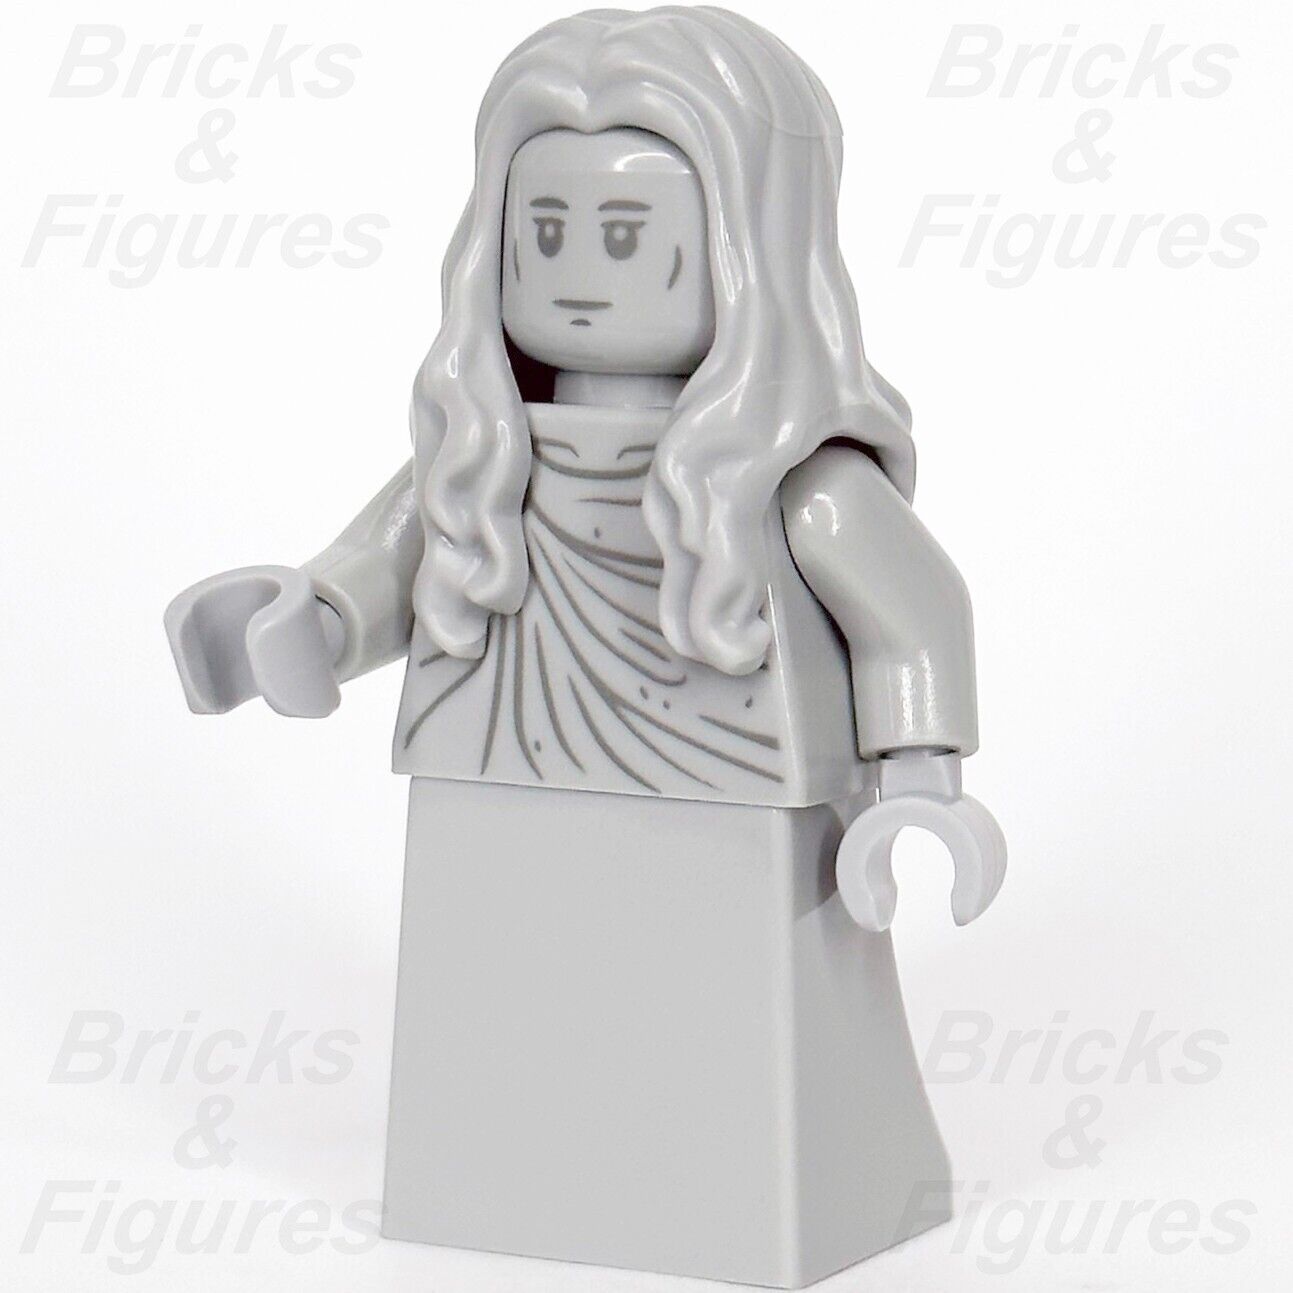 LEGO Elf Statue Minifigure The Hobbit & The Lord of the Rings 10316 lor130 LOTR - Bricks & Figures